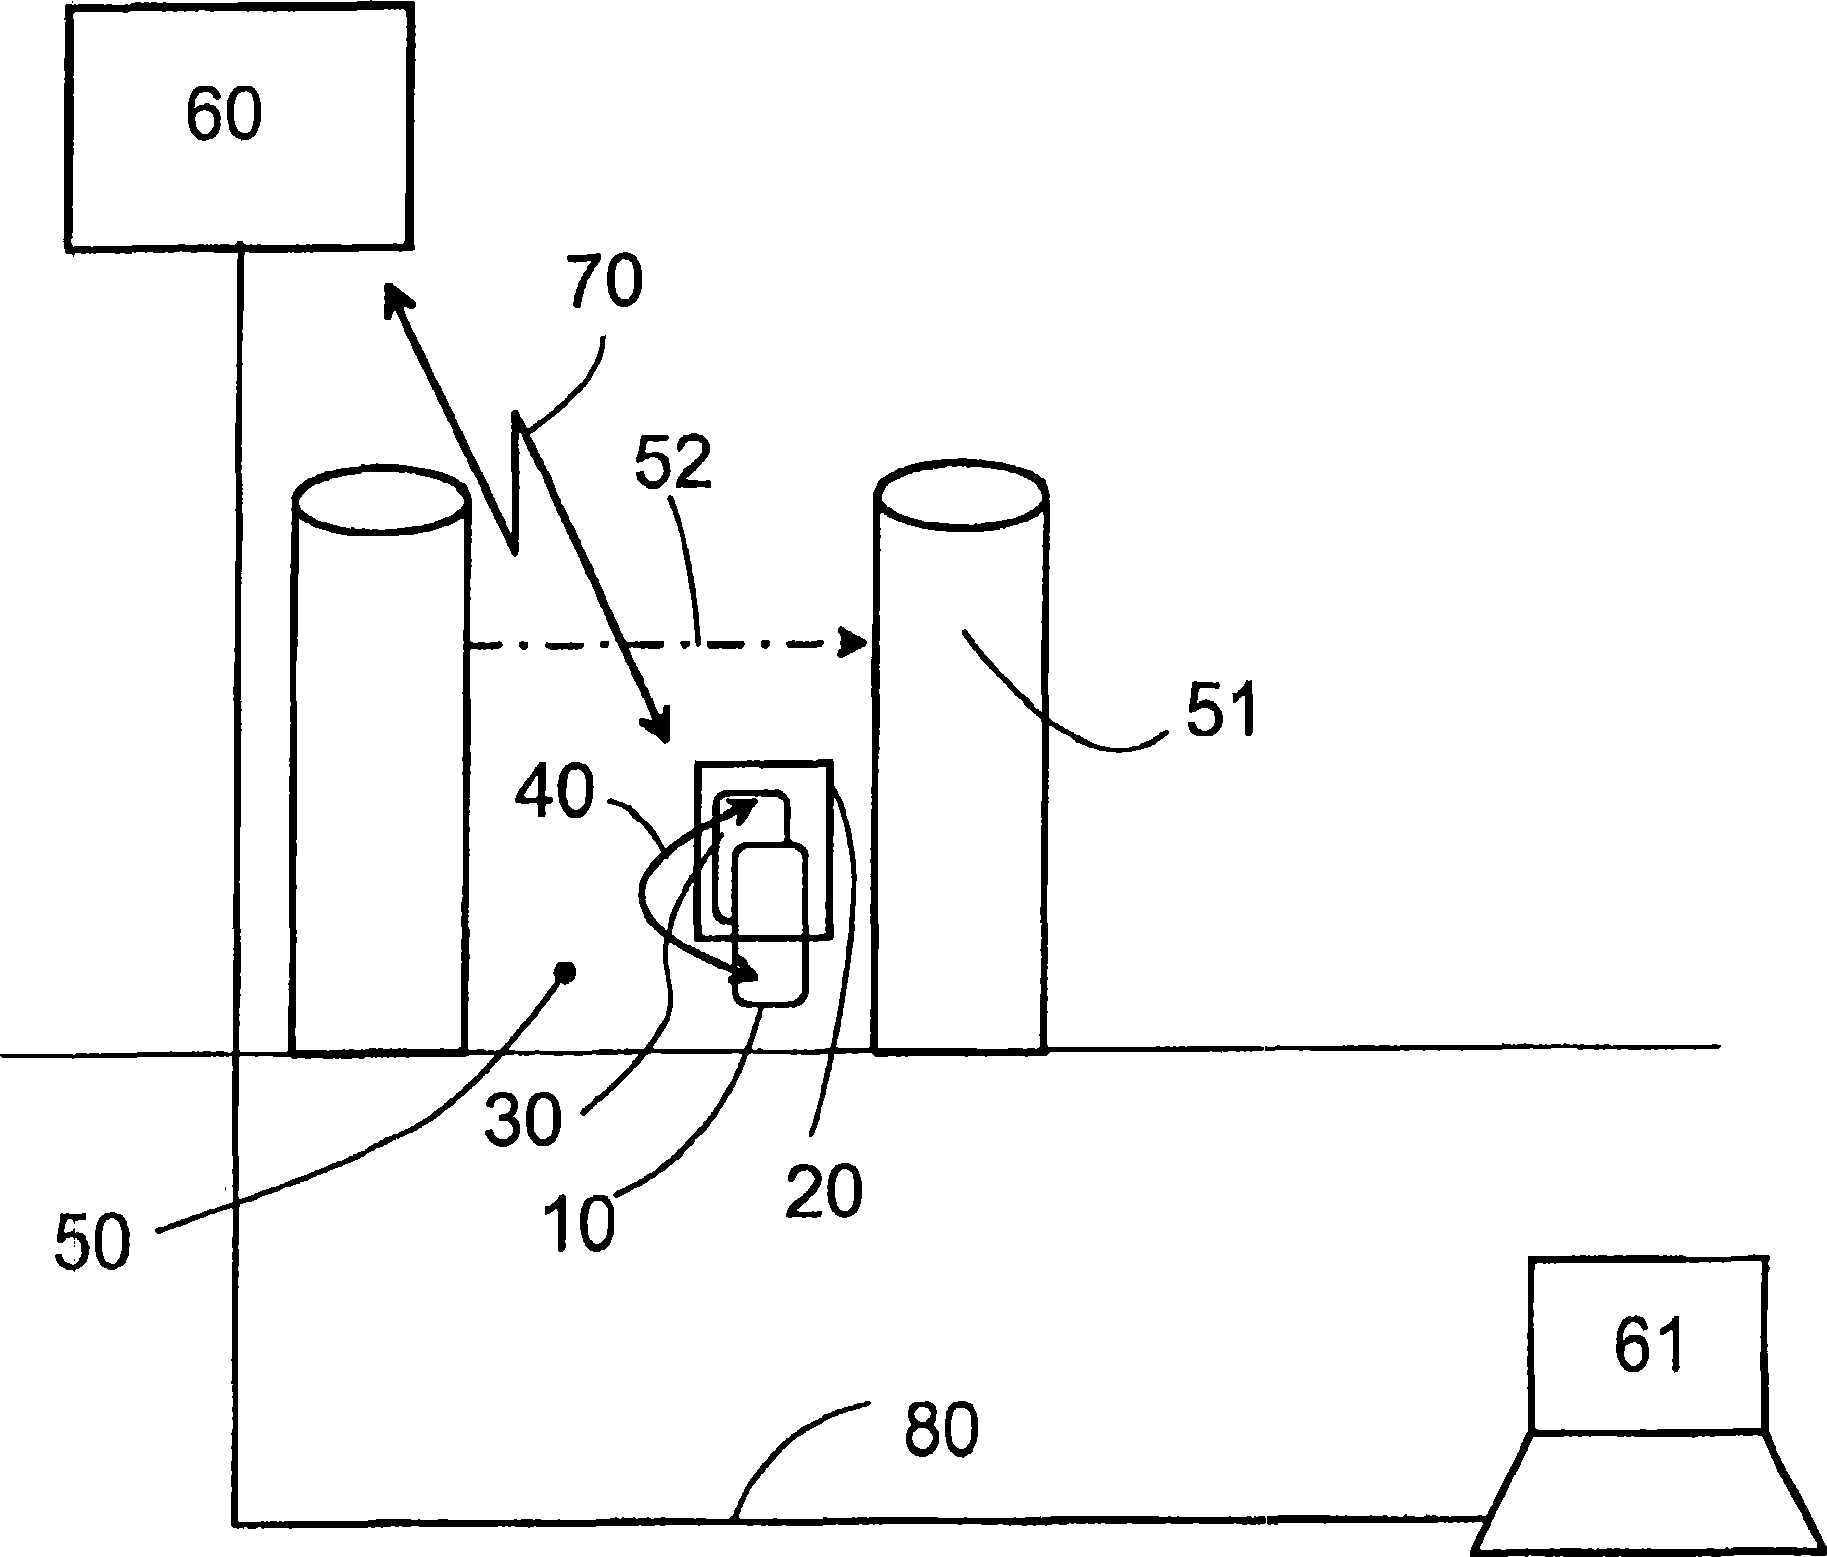 Method for authorised granting of a service and device for carrying out said method